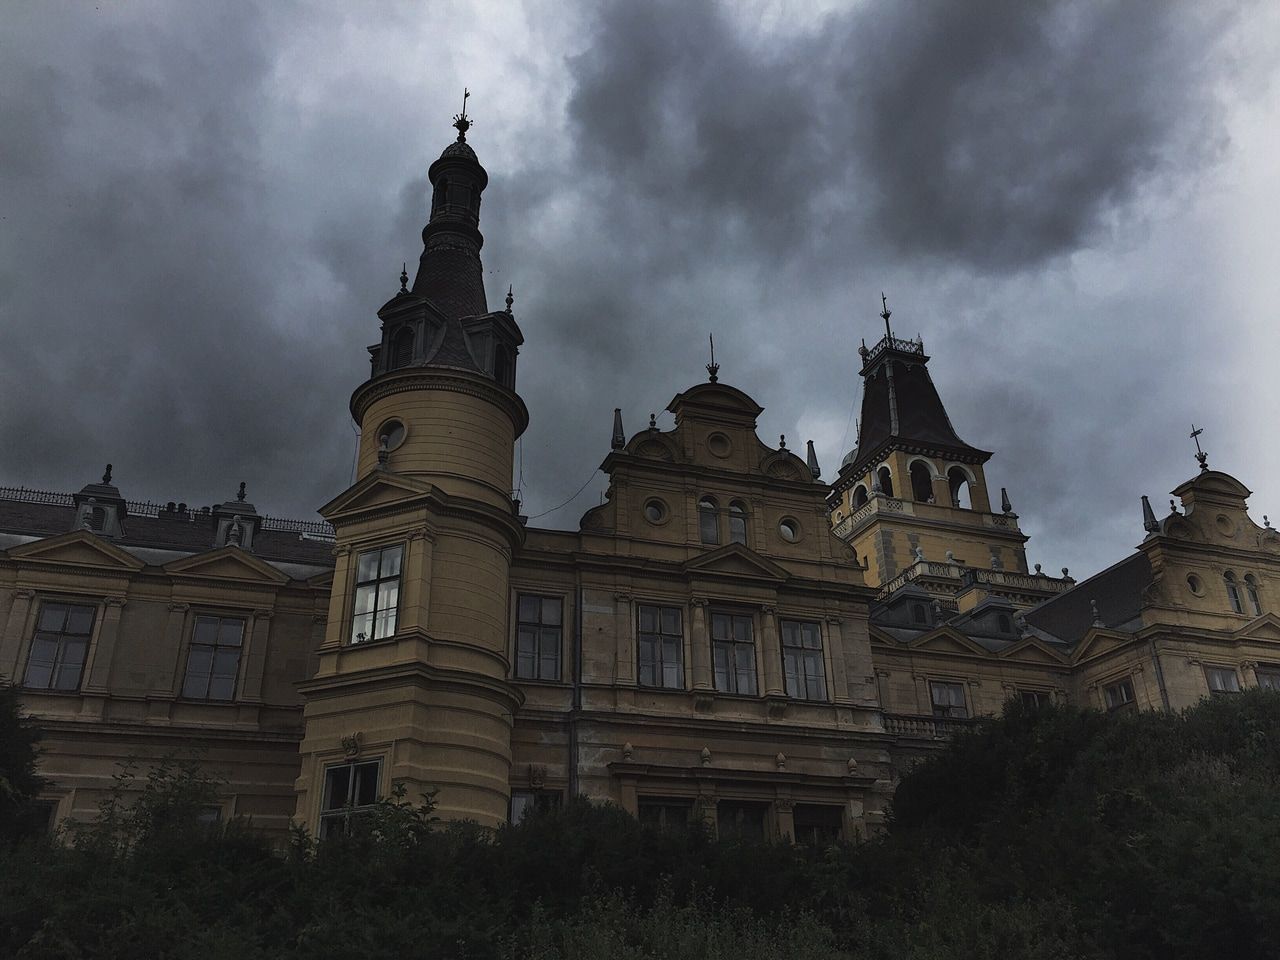 A large building with a tower and a cloudy sky above it. - Dark academia